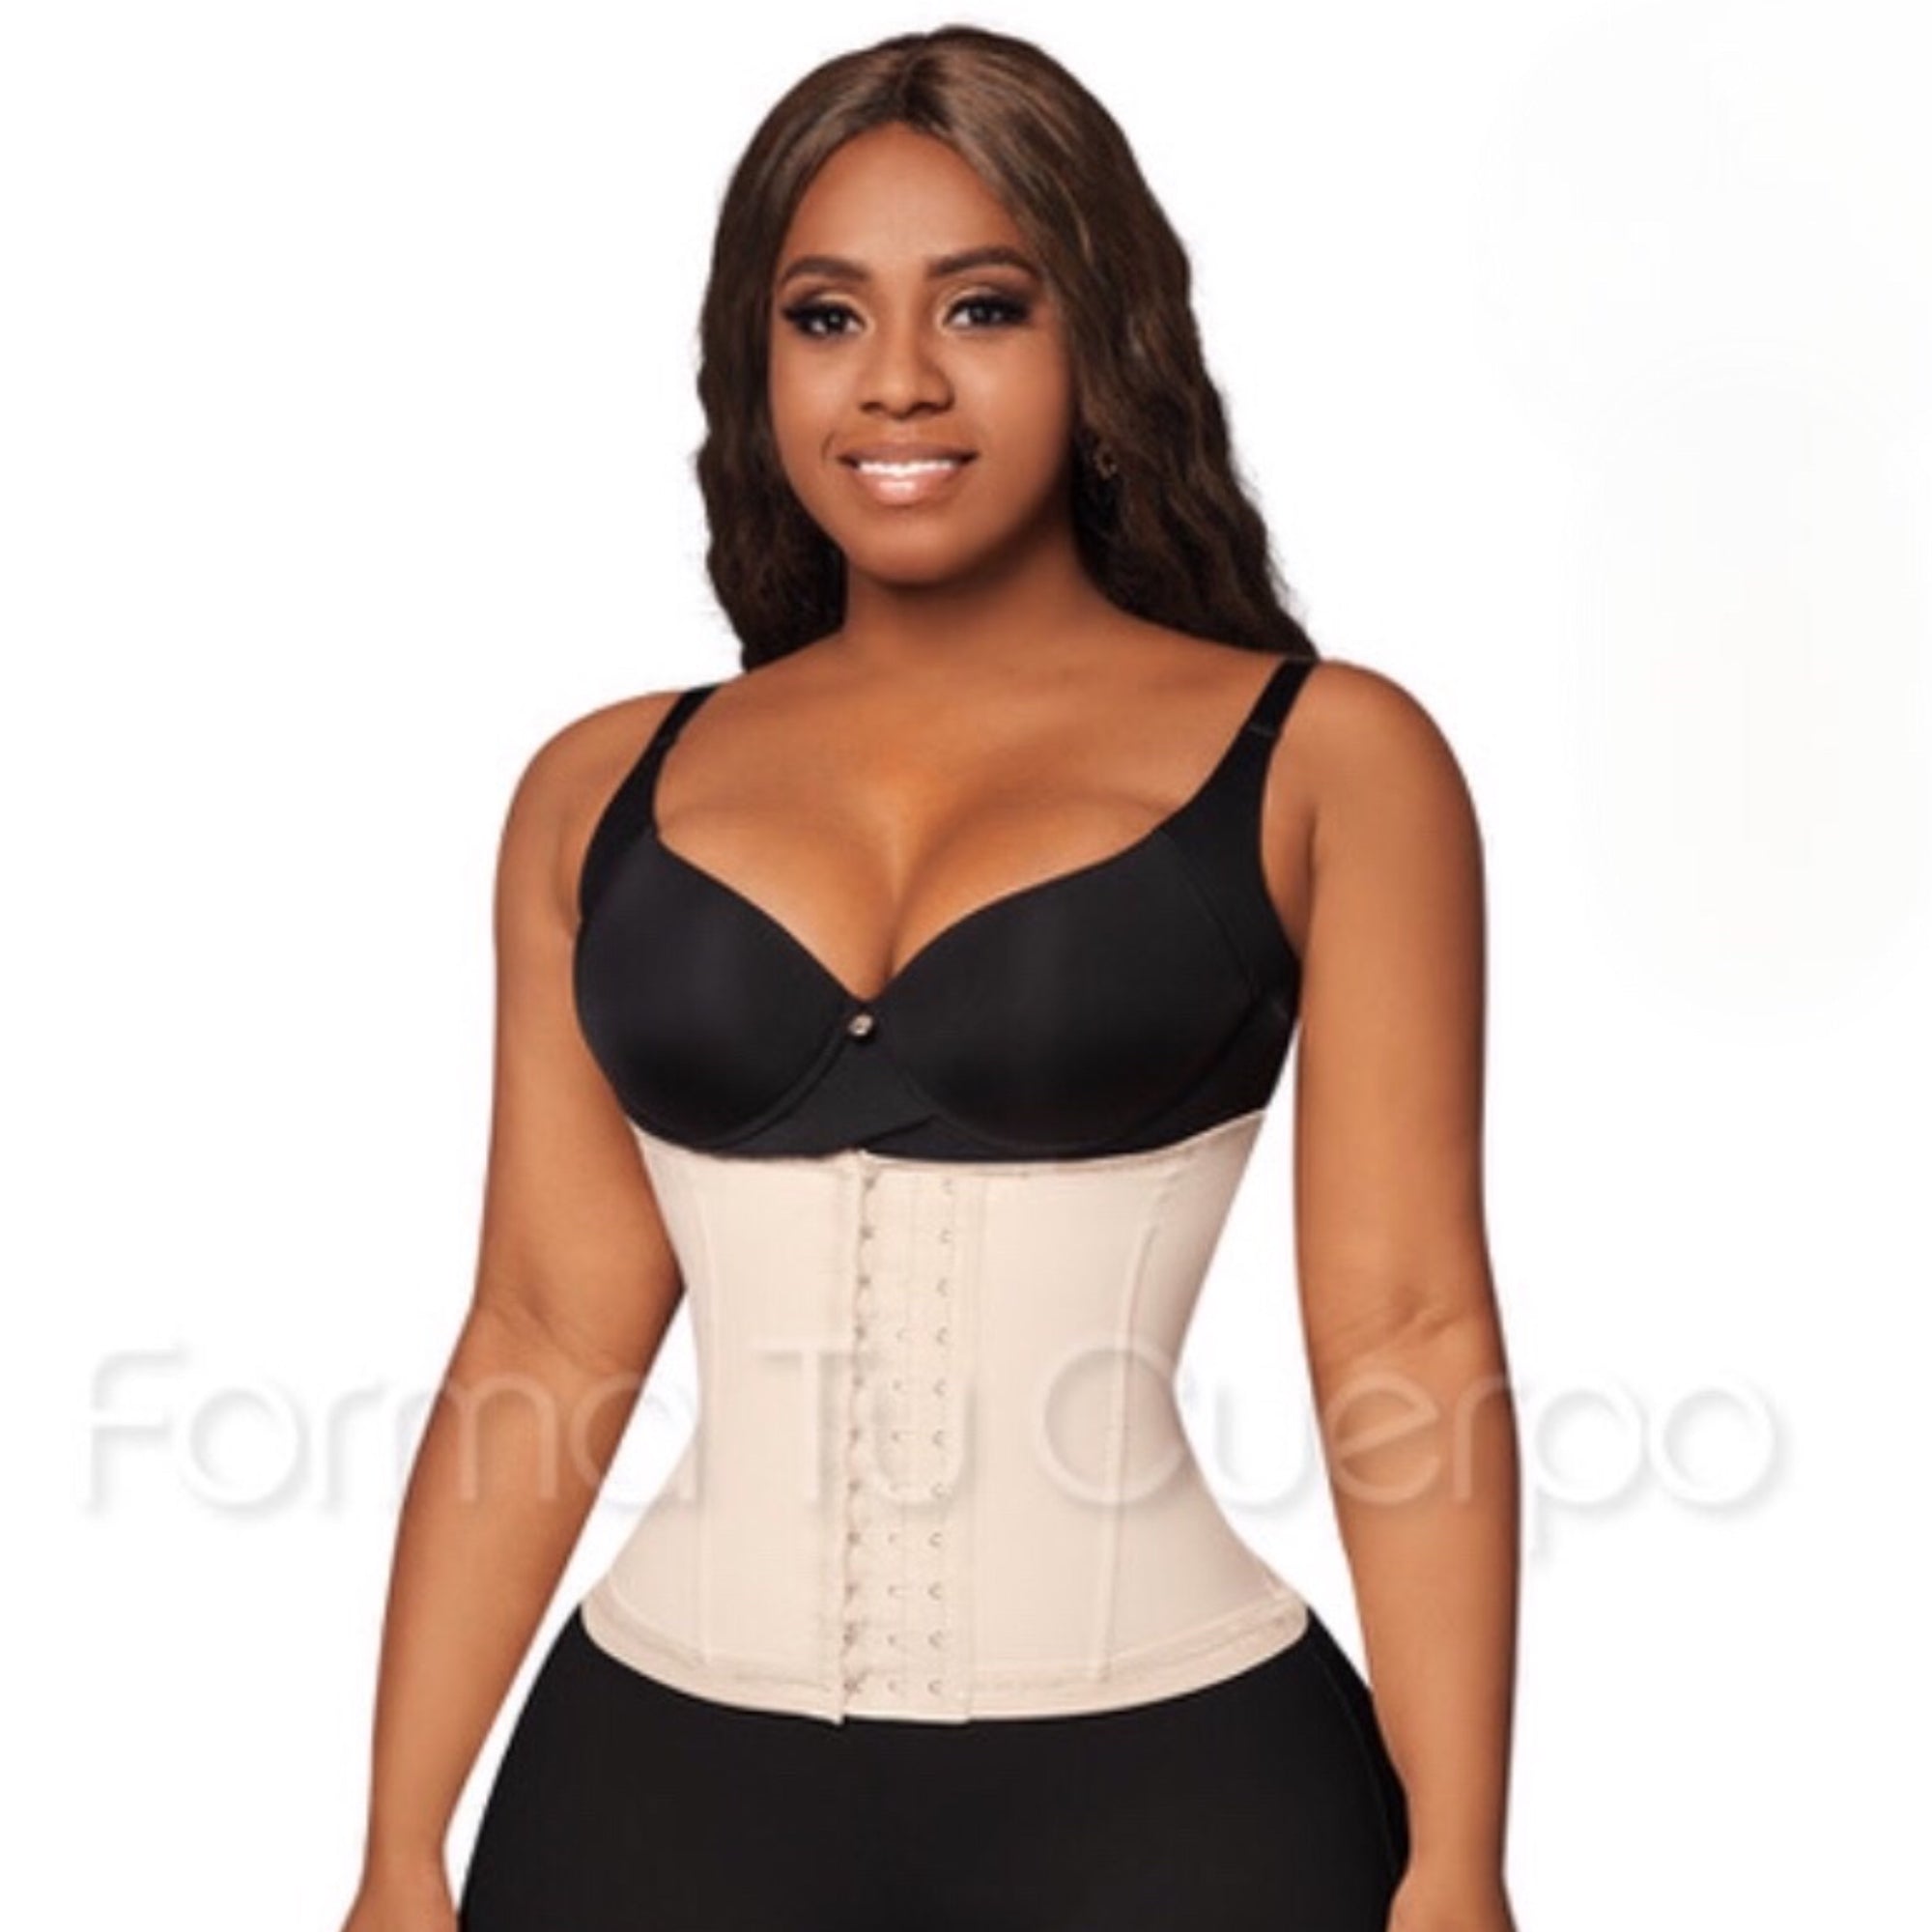 Model O-064 - Fabulous and Exceptional Waist Cincher Style Under-Bust Corset